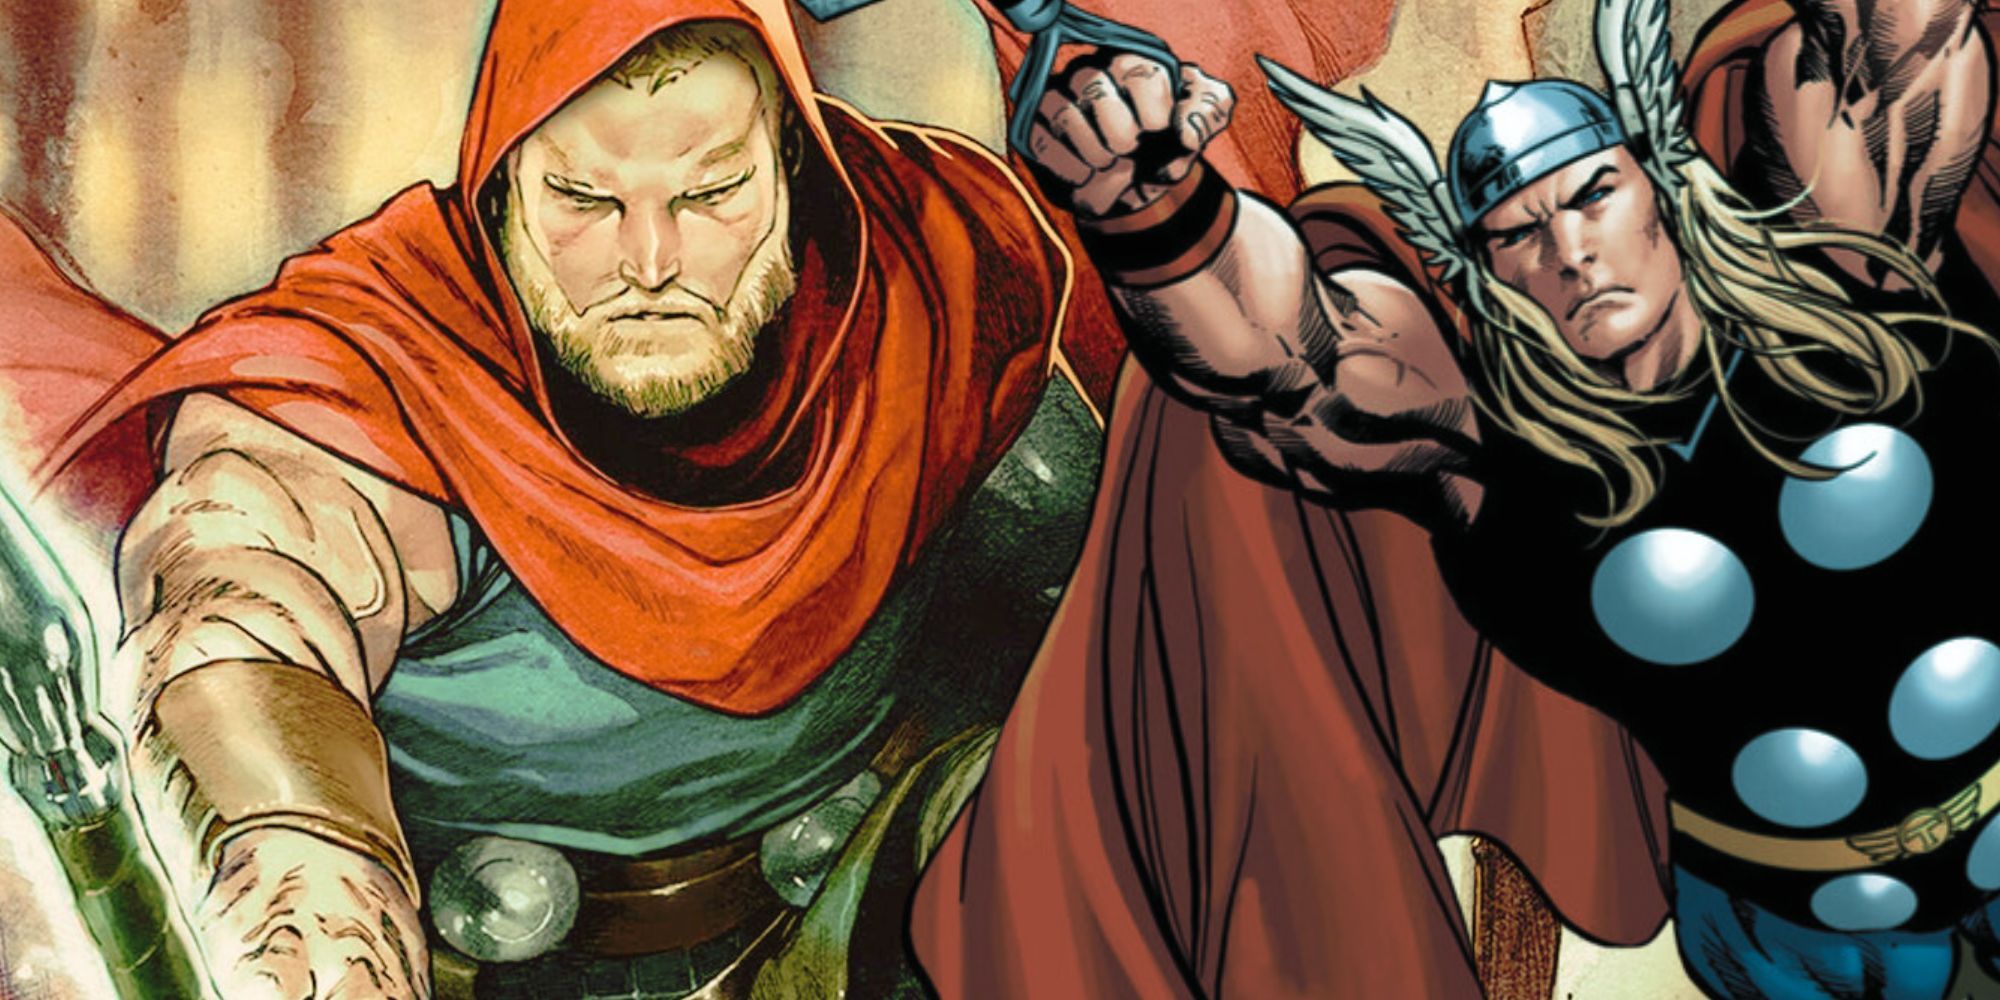 A split image of Thor's milestones: Odinson in Unmighty Thor and All-Father Thor in Marvel Comics